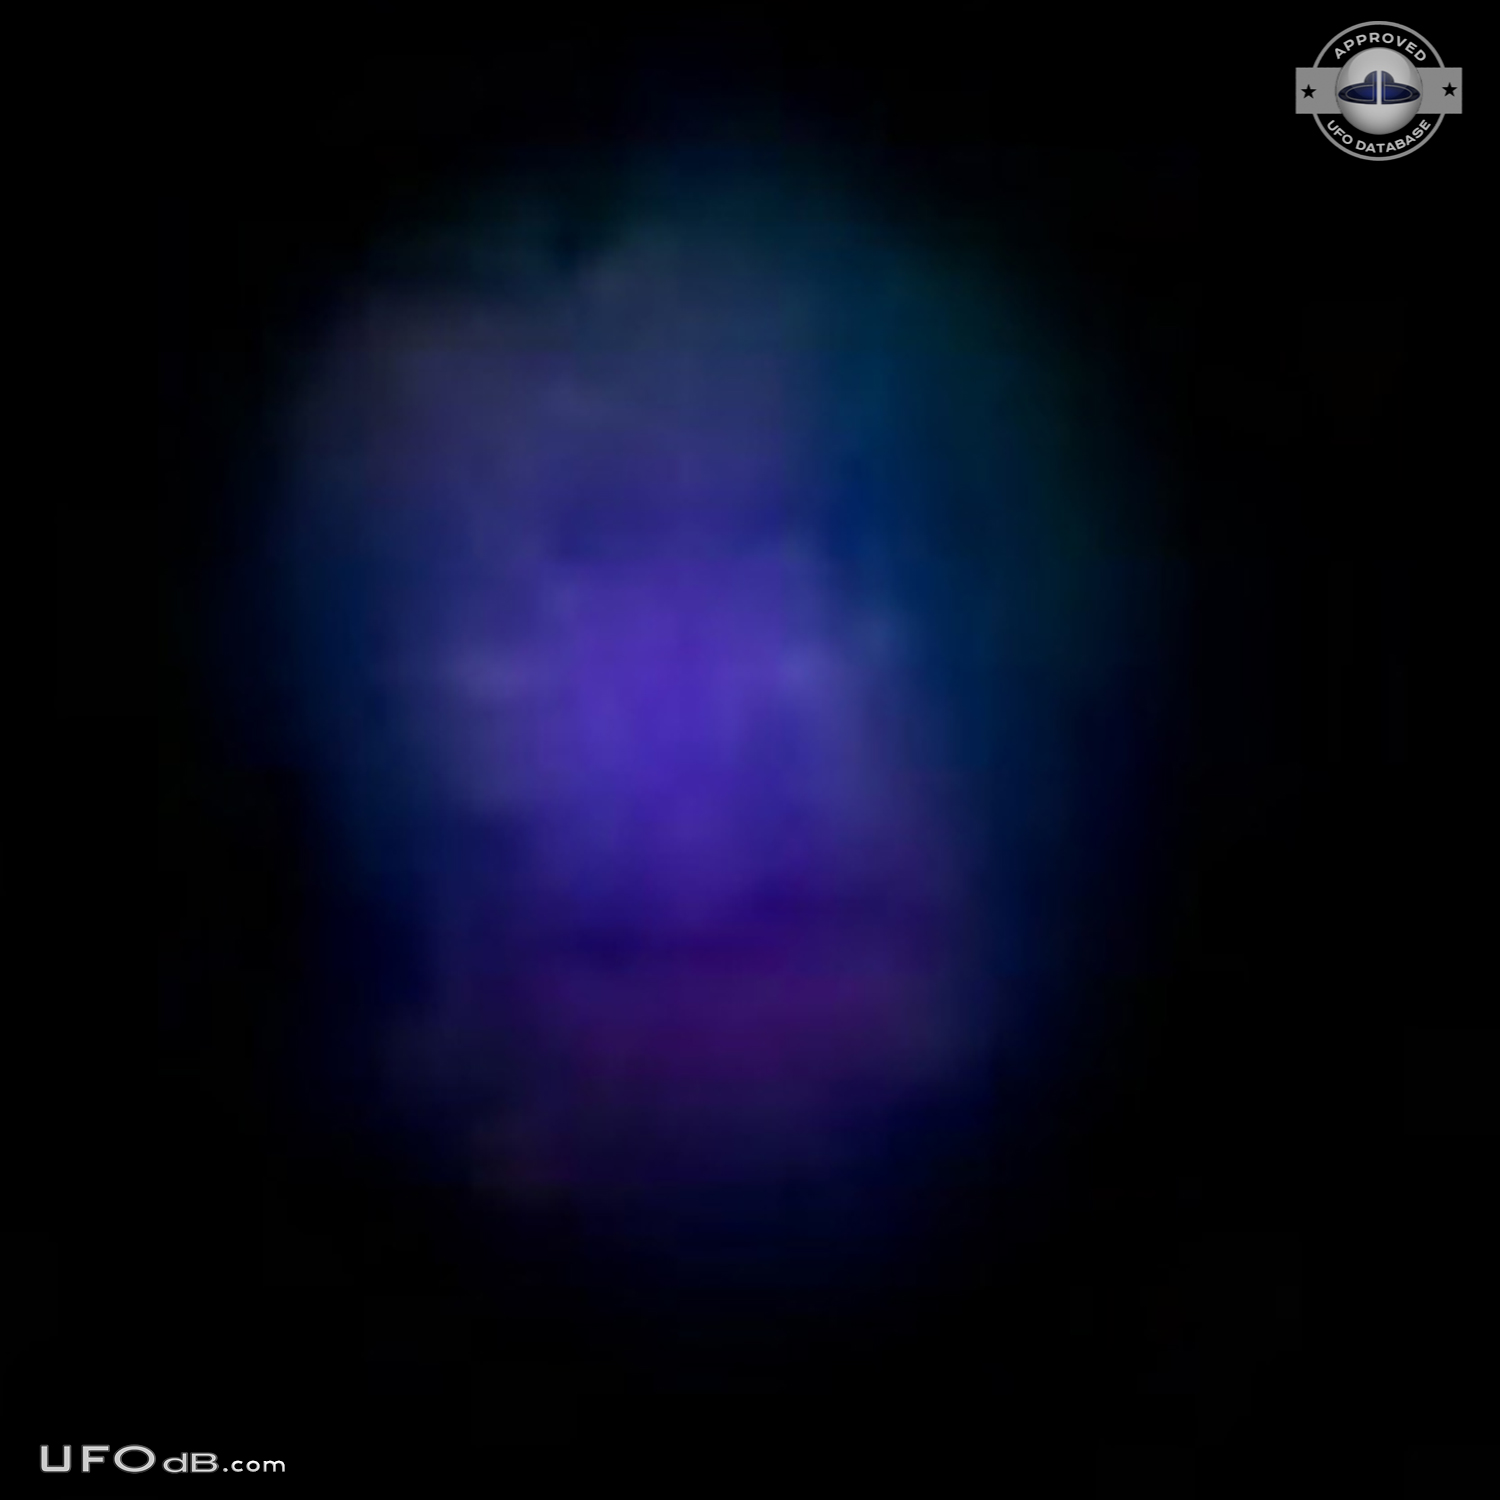 UFO Witness in Antrim New Hampshire unable to get video working - 2012 UFO Picture #527-3